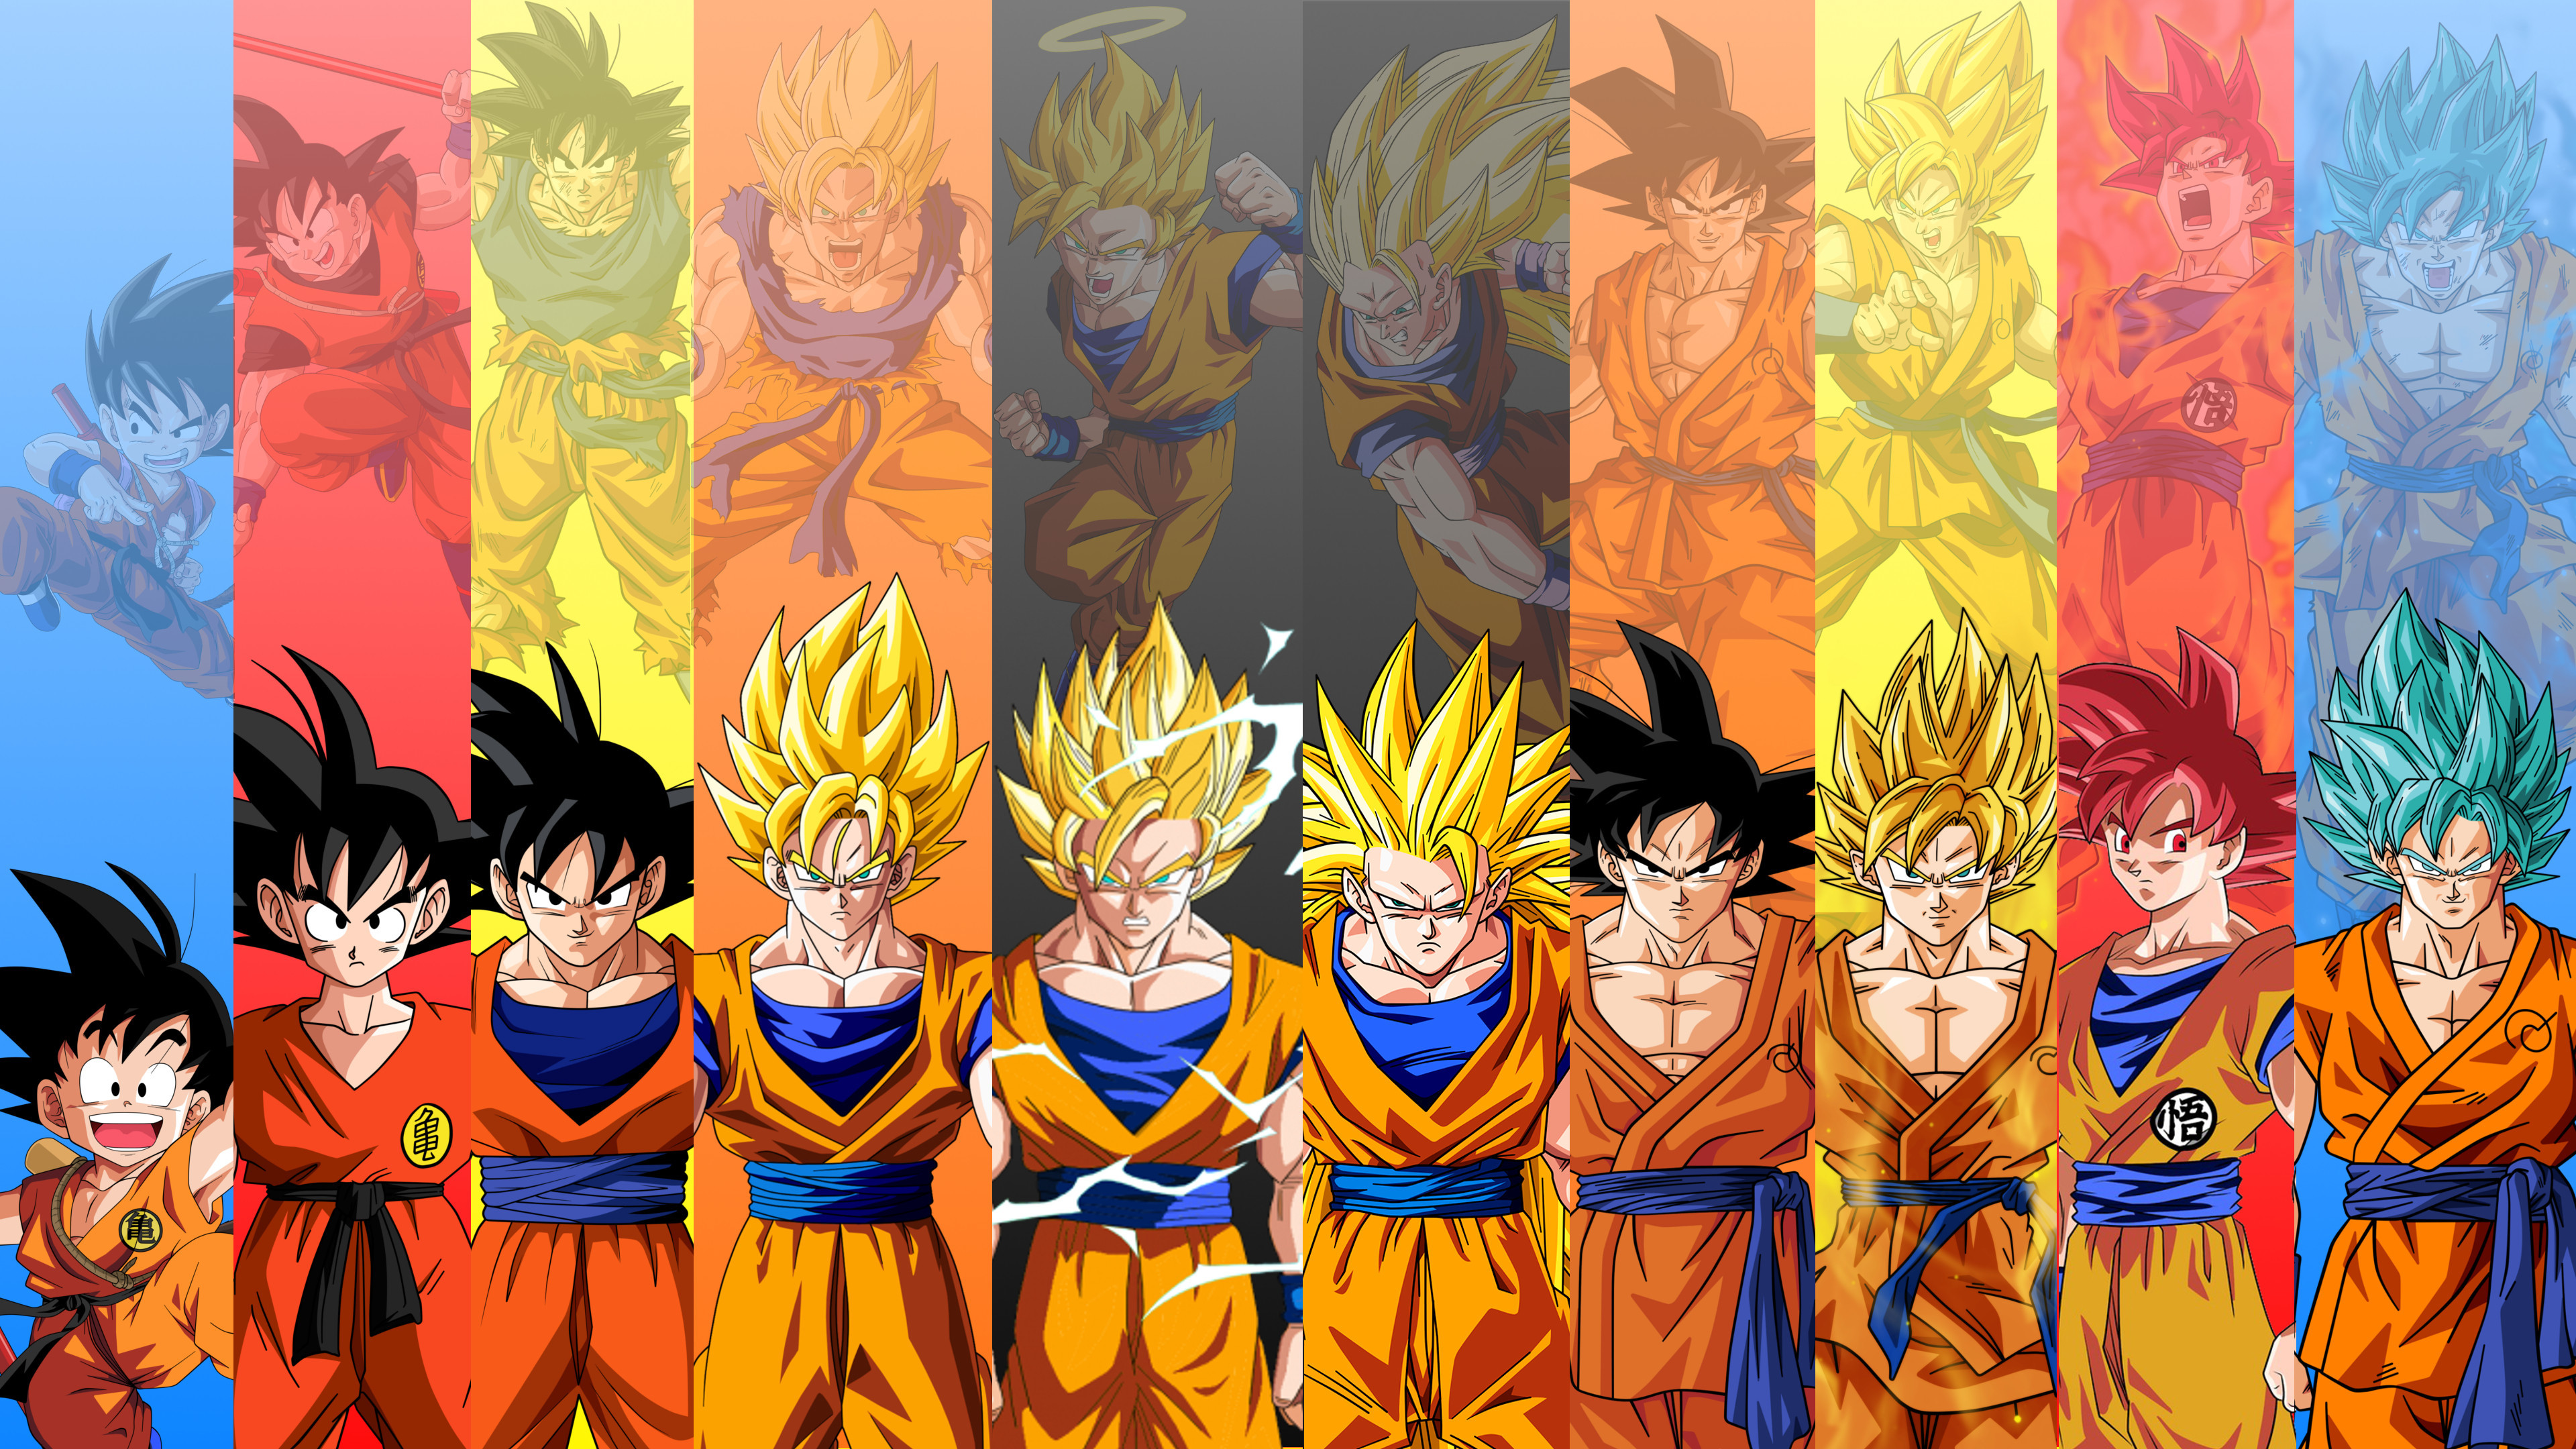 3840x2160 ImageJust made this 4K Wallpaper featuring 10 Forms of Goku from DB, DBZ,  and DBS. Enjoy!